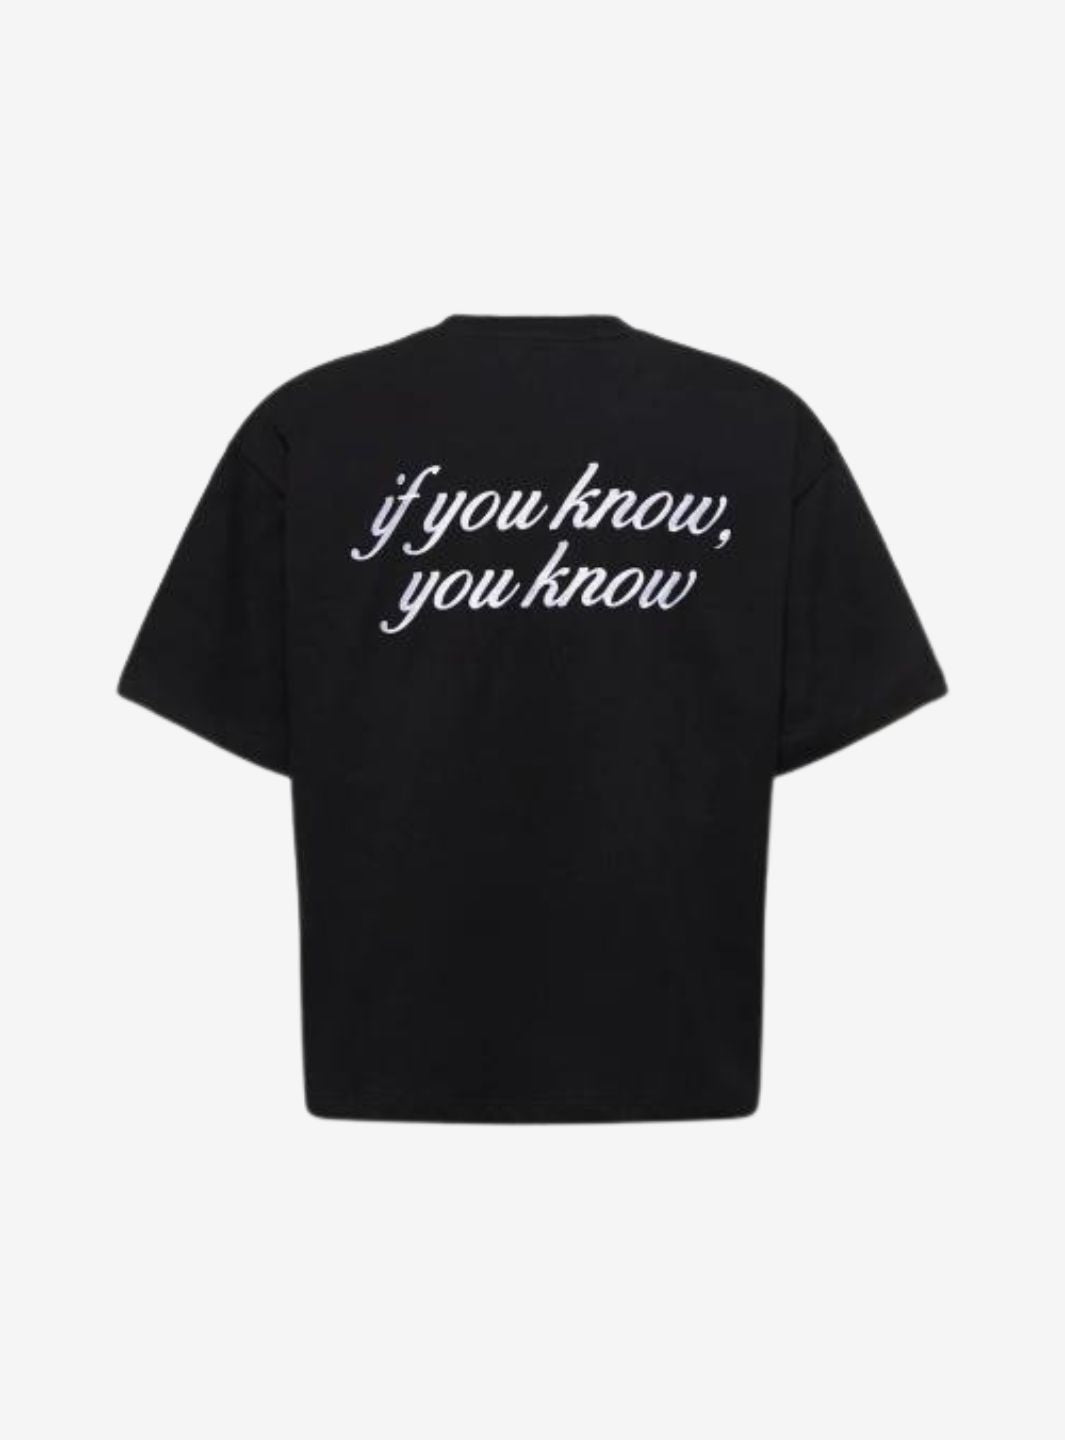 Garment-Workshop T-shirt If You Know You Know Black 